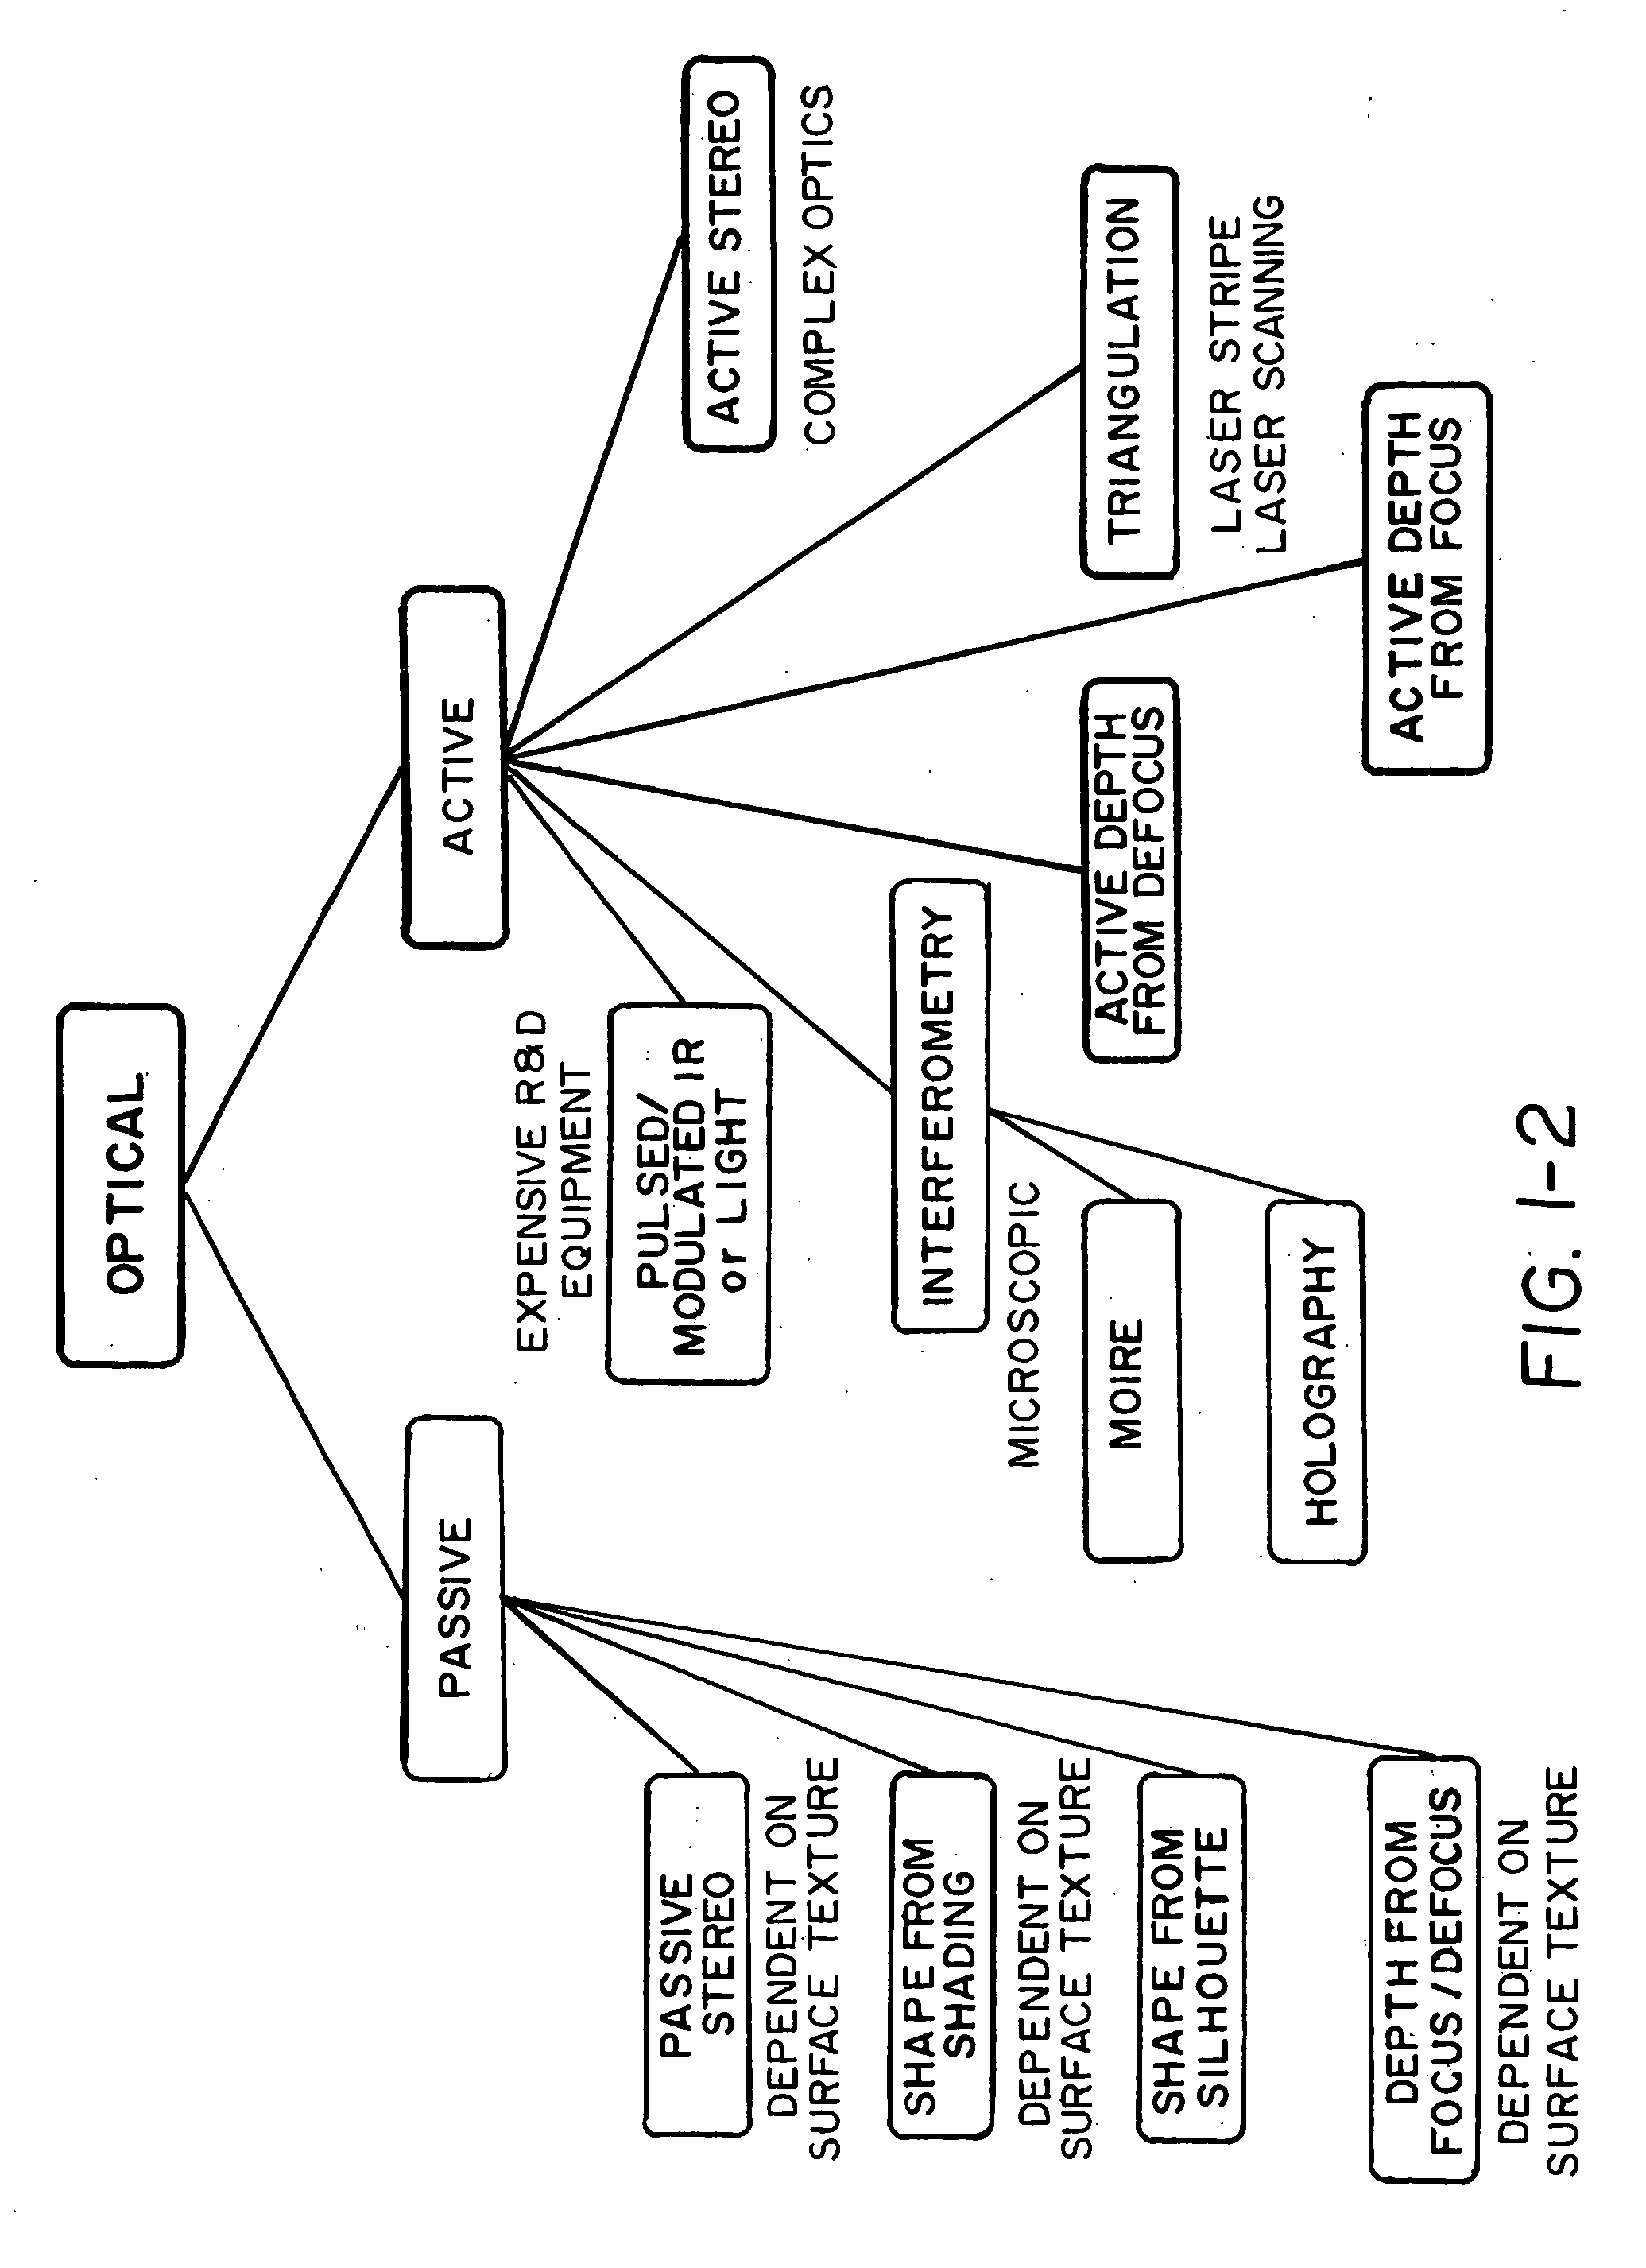 Apparatus and methods for the volumetric and dimensional measurement of livestock